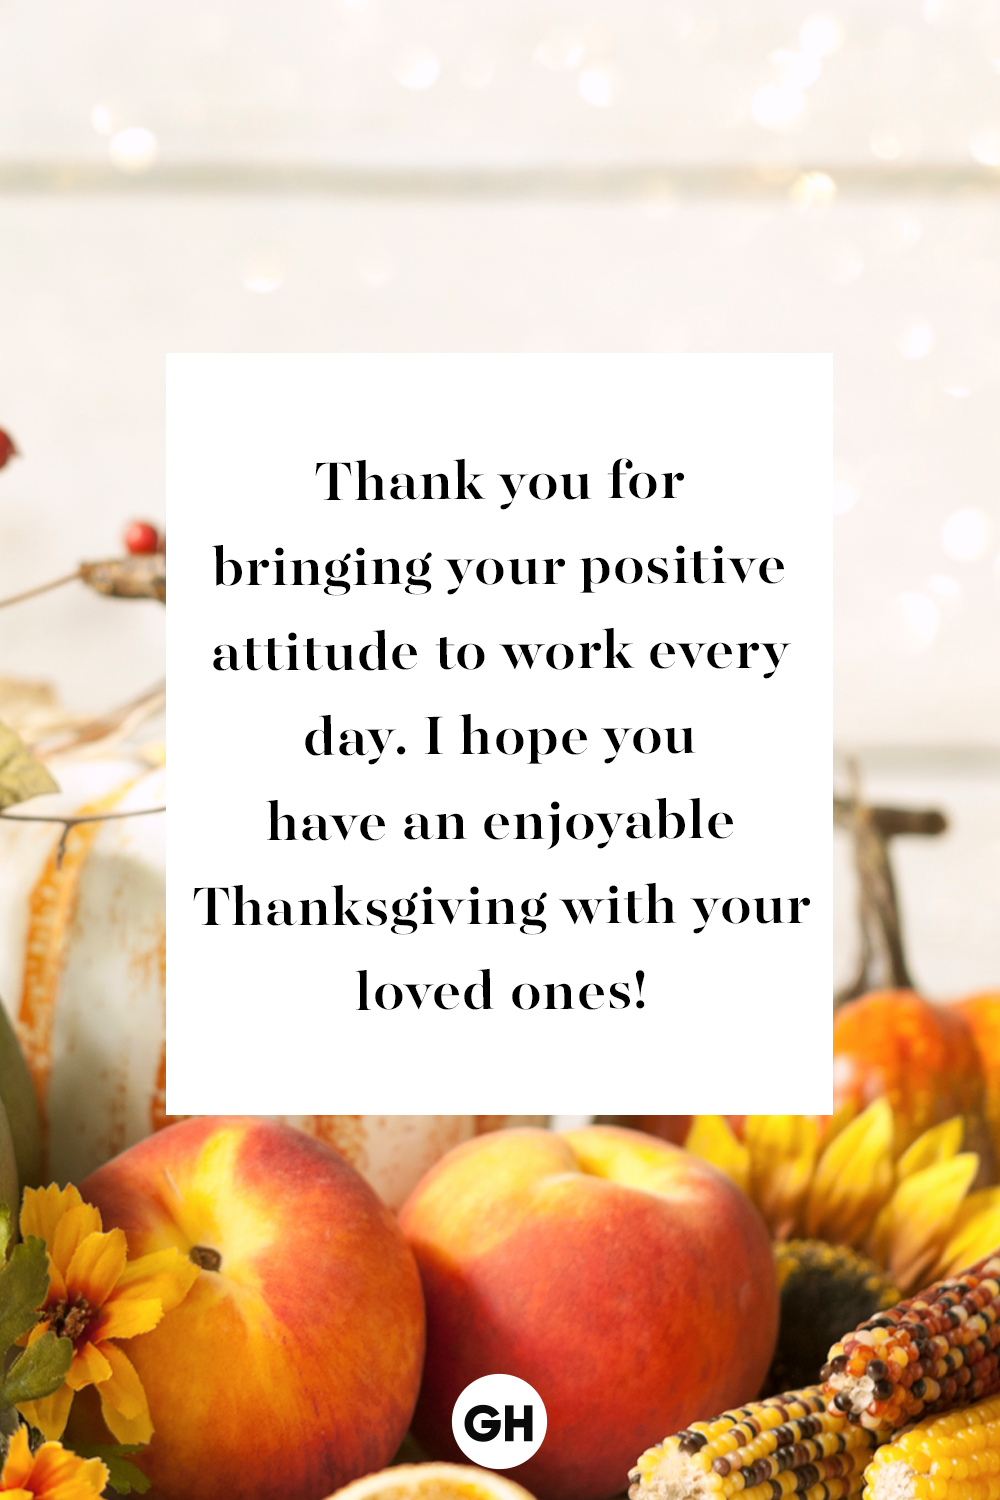 Happy Thanksgiving 2021: Wishes, images, messages and greetings to